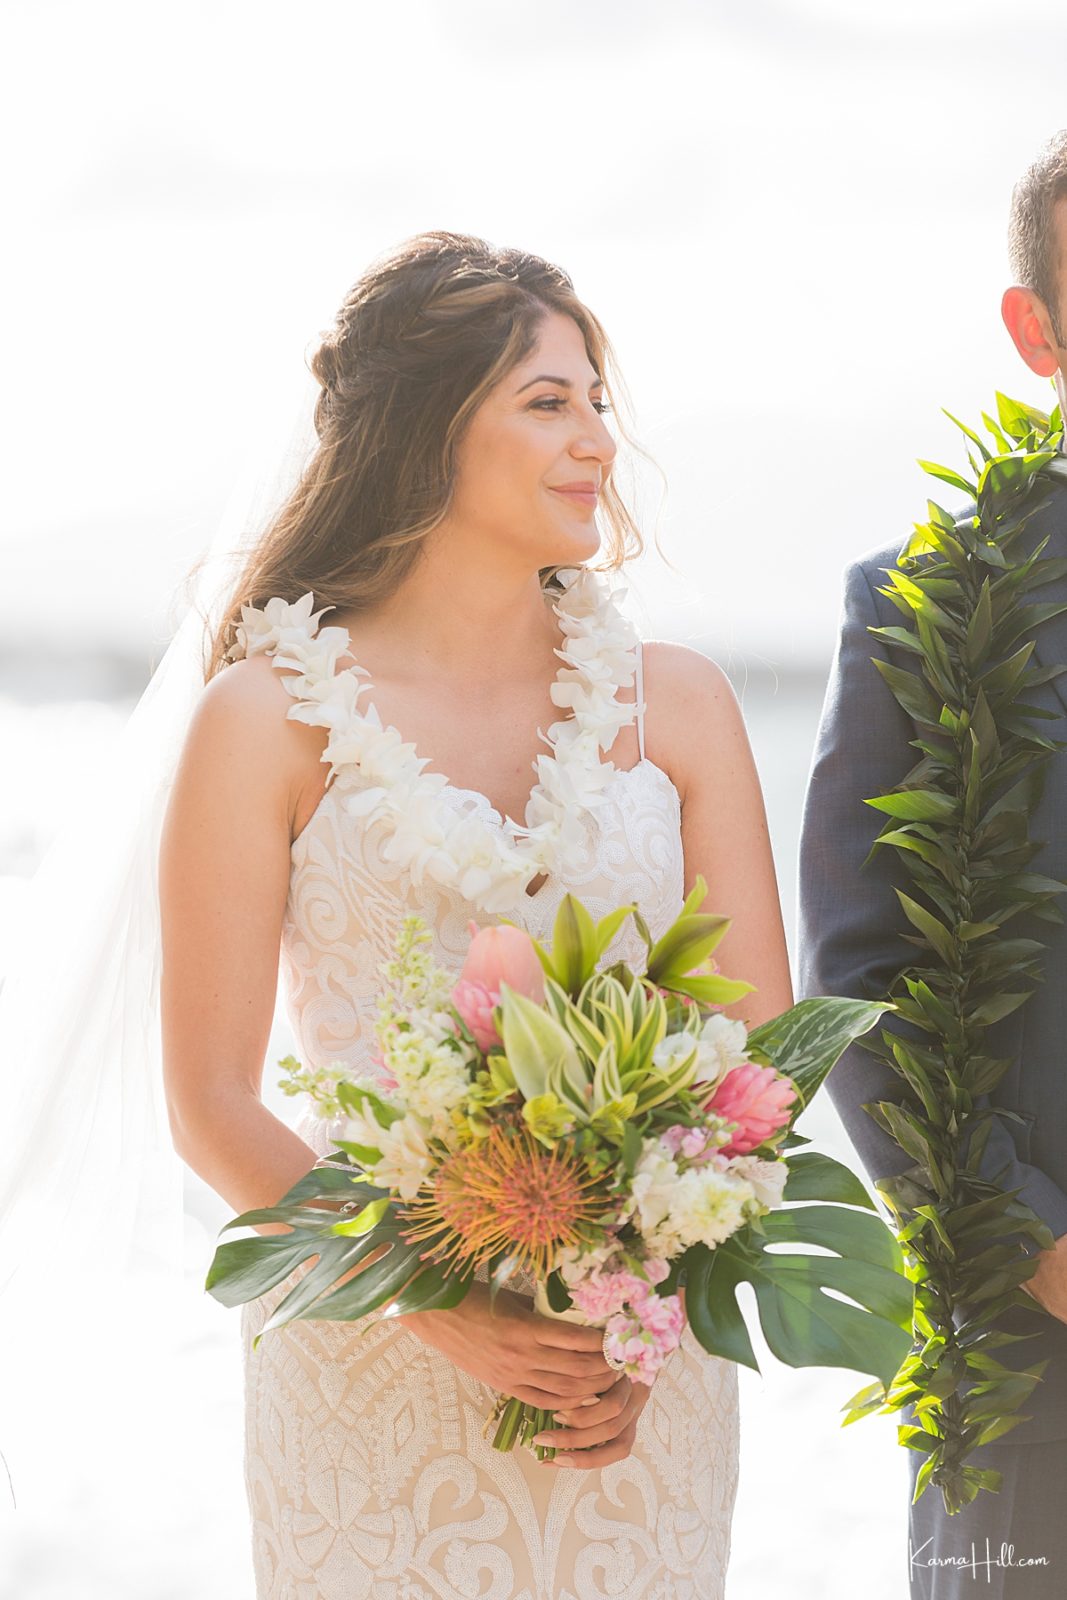 With My Whole Heart - Serafina & Peter's Maui Elopement